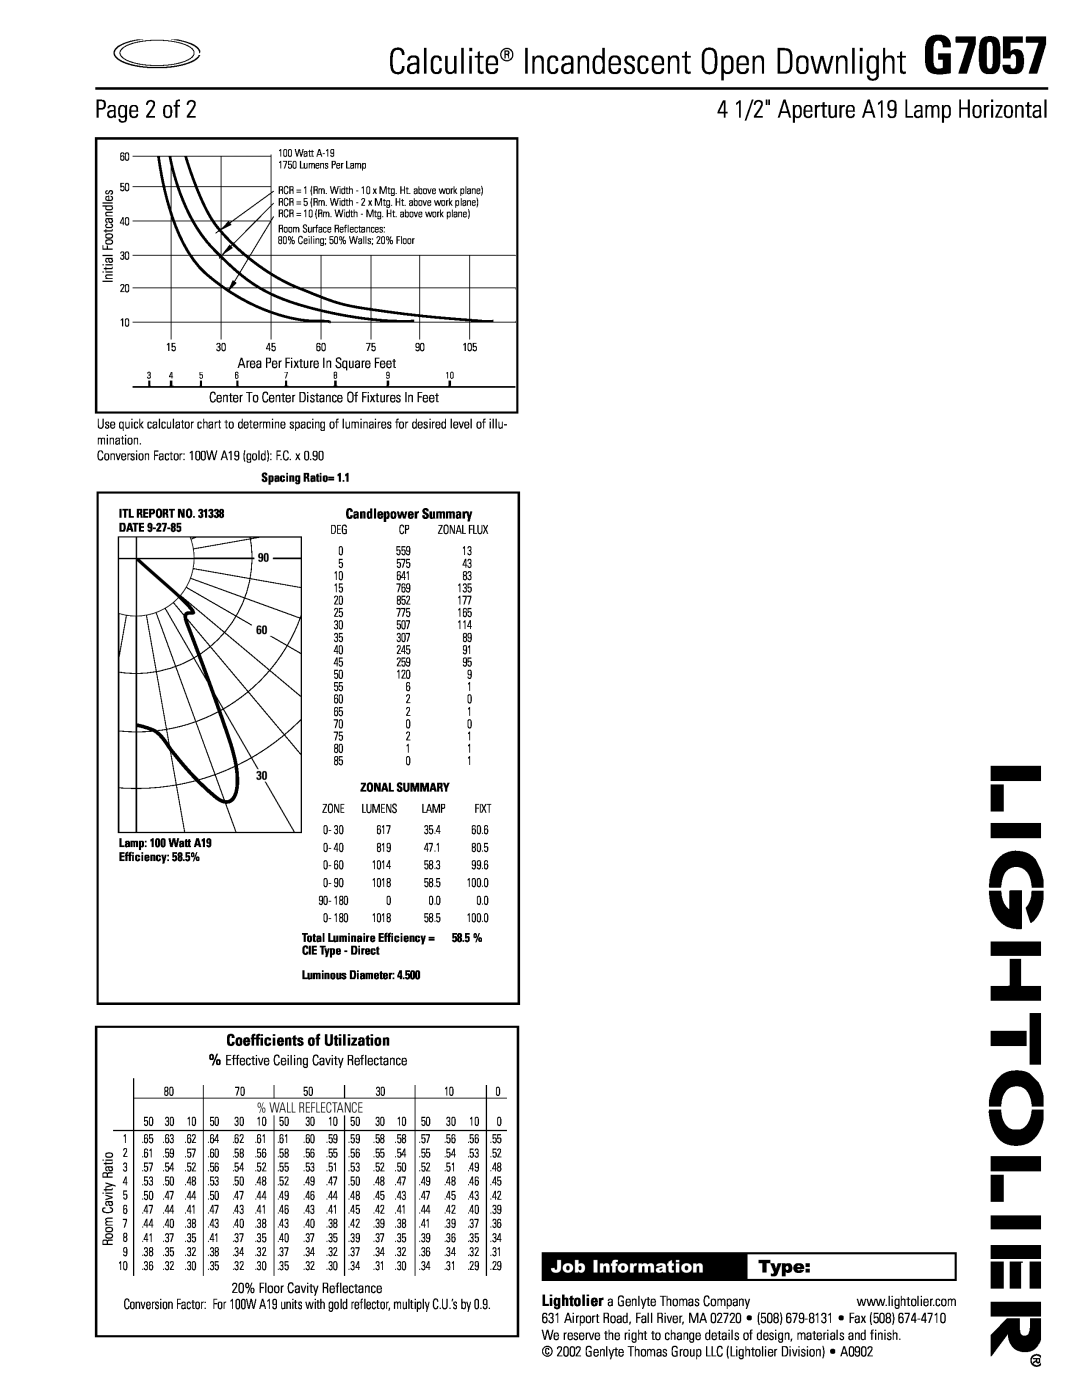 Lightolier Calculite Incandescent Open Downlight G7057, Page 2 of, 4 1/2 Aperture A19 Lamp Horizontal, Job Information 